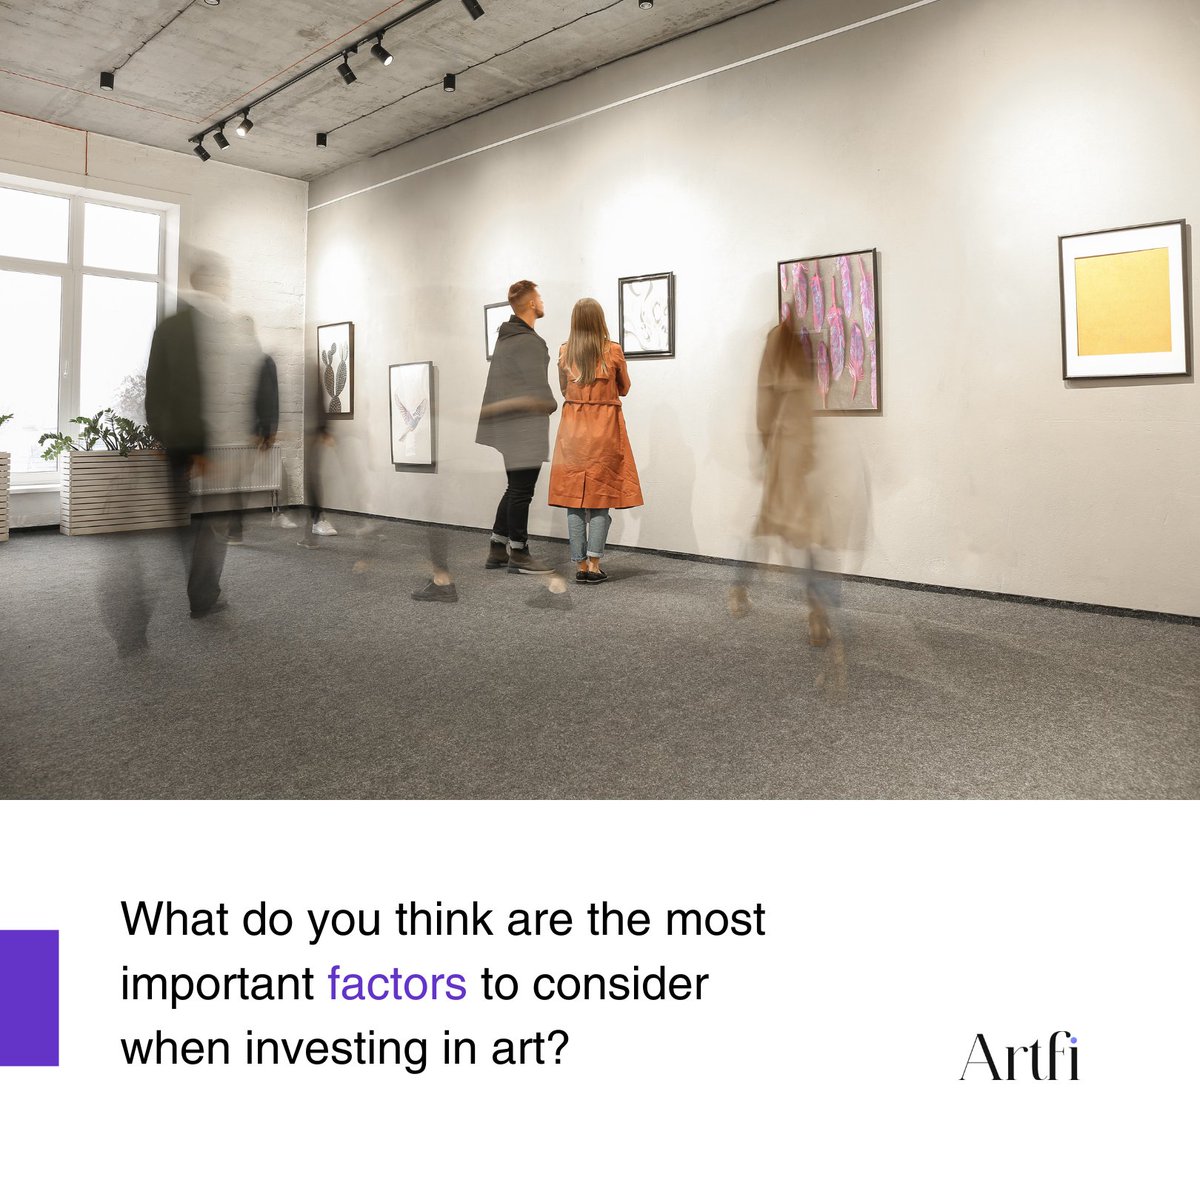 What do you think are the most important factors to consider when investing in art? Let us know in the comments below.